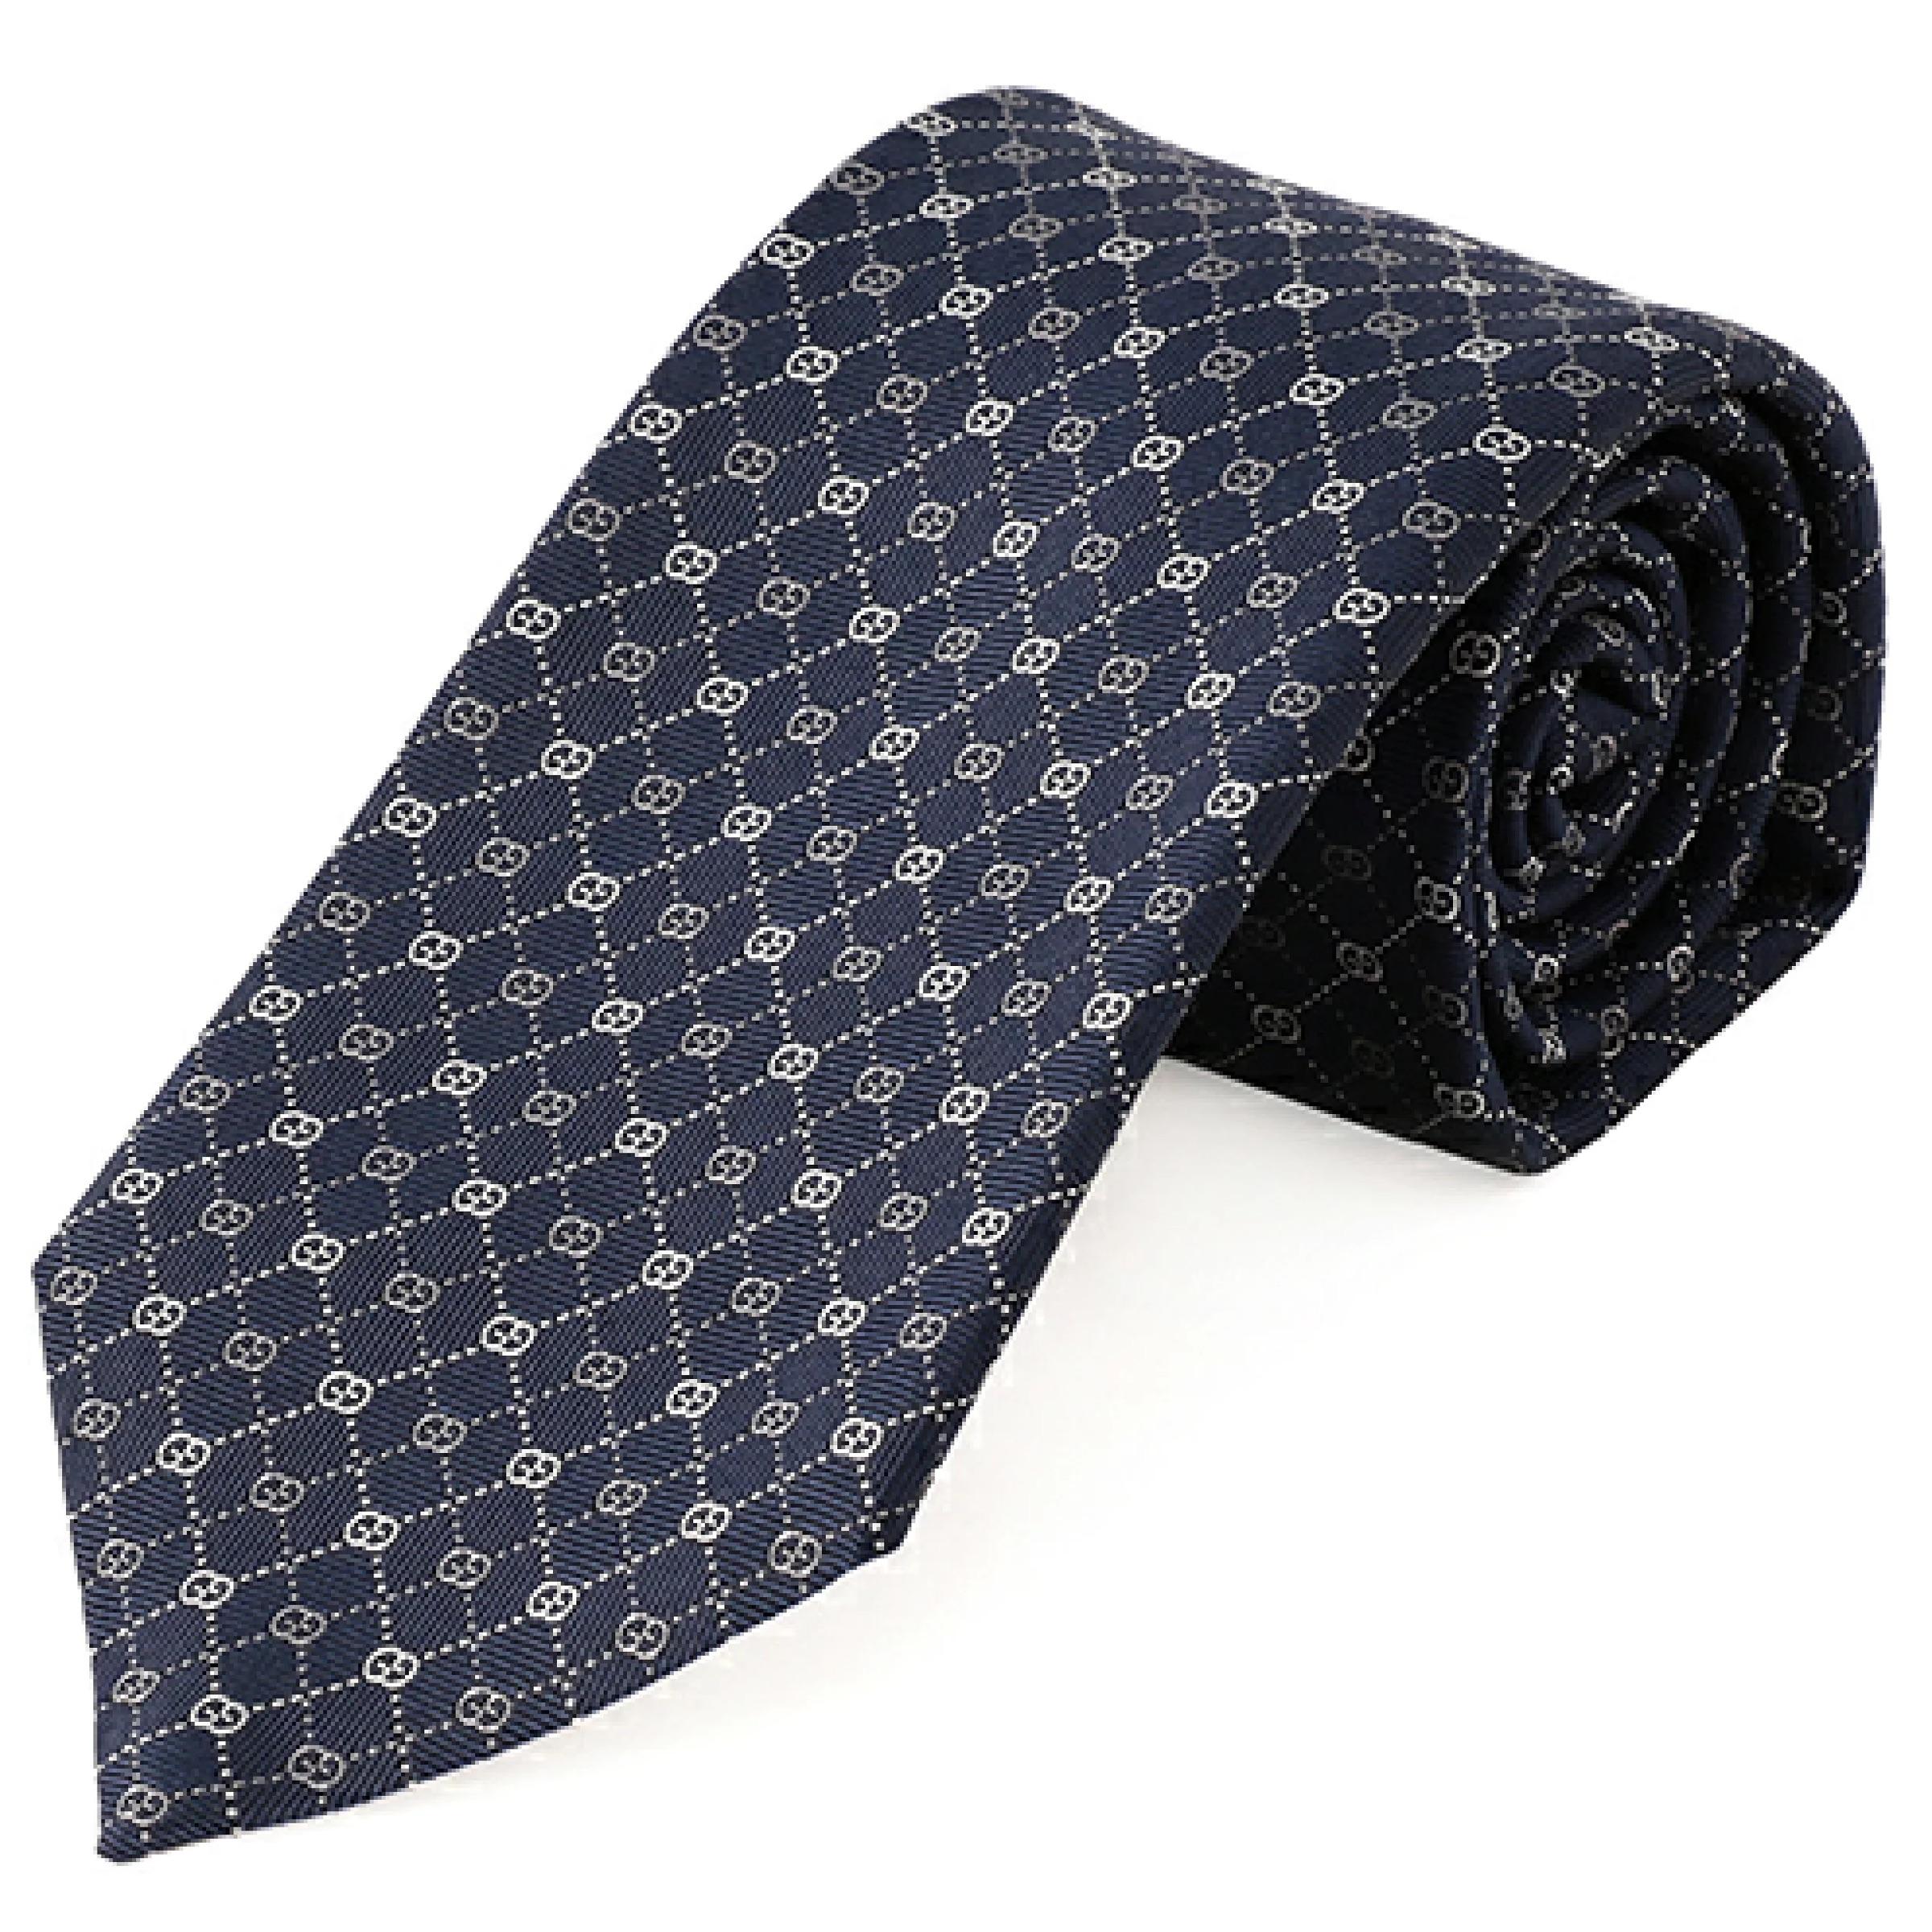 New Gucci Blue Monogram GG Silk Neck Tie

Authenticity Guaranteed

DETAILS
Brand: Gucci
Condition: Brand new
Gender: Men
Category: Tie
Color: Blue
Material: Silk
Monogram GG logo
Made in Italy
Includes: dust bag and brand authenticity